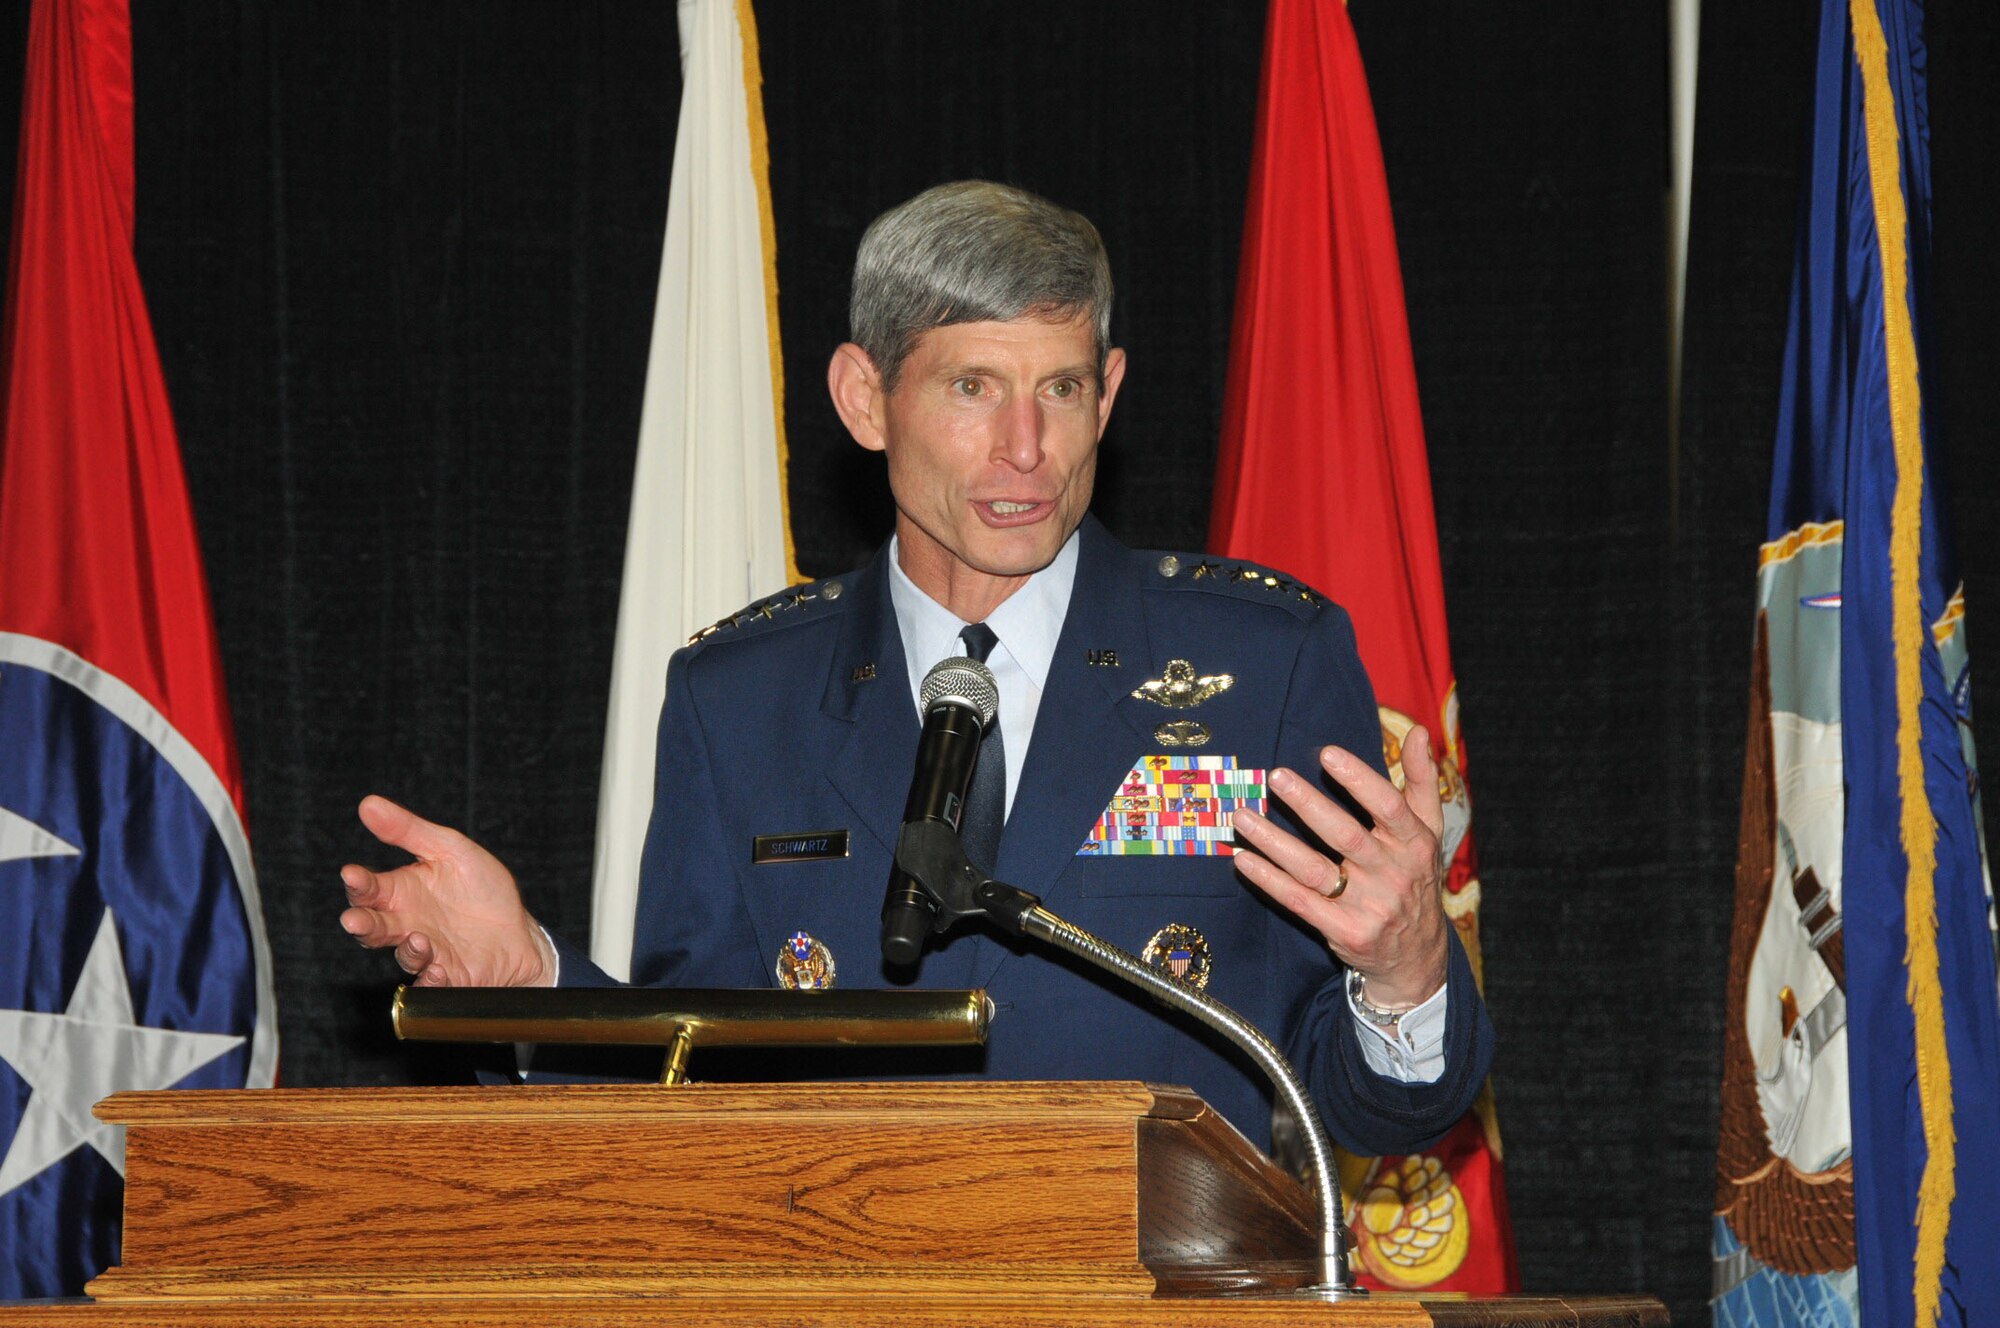 Chief of Staff of the Air Force Gen. Norton Schwartz speaks to a crowd of approximately 600 people at the Arnold Community Council banquet Nov. 17 at the Calsonic Arena in Shelbyville, Tenn. (U.S. Air Force photo/David Housch)

